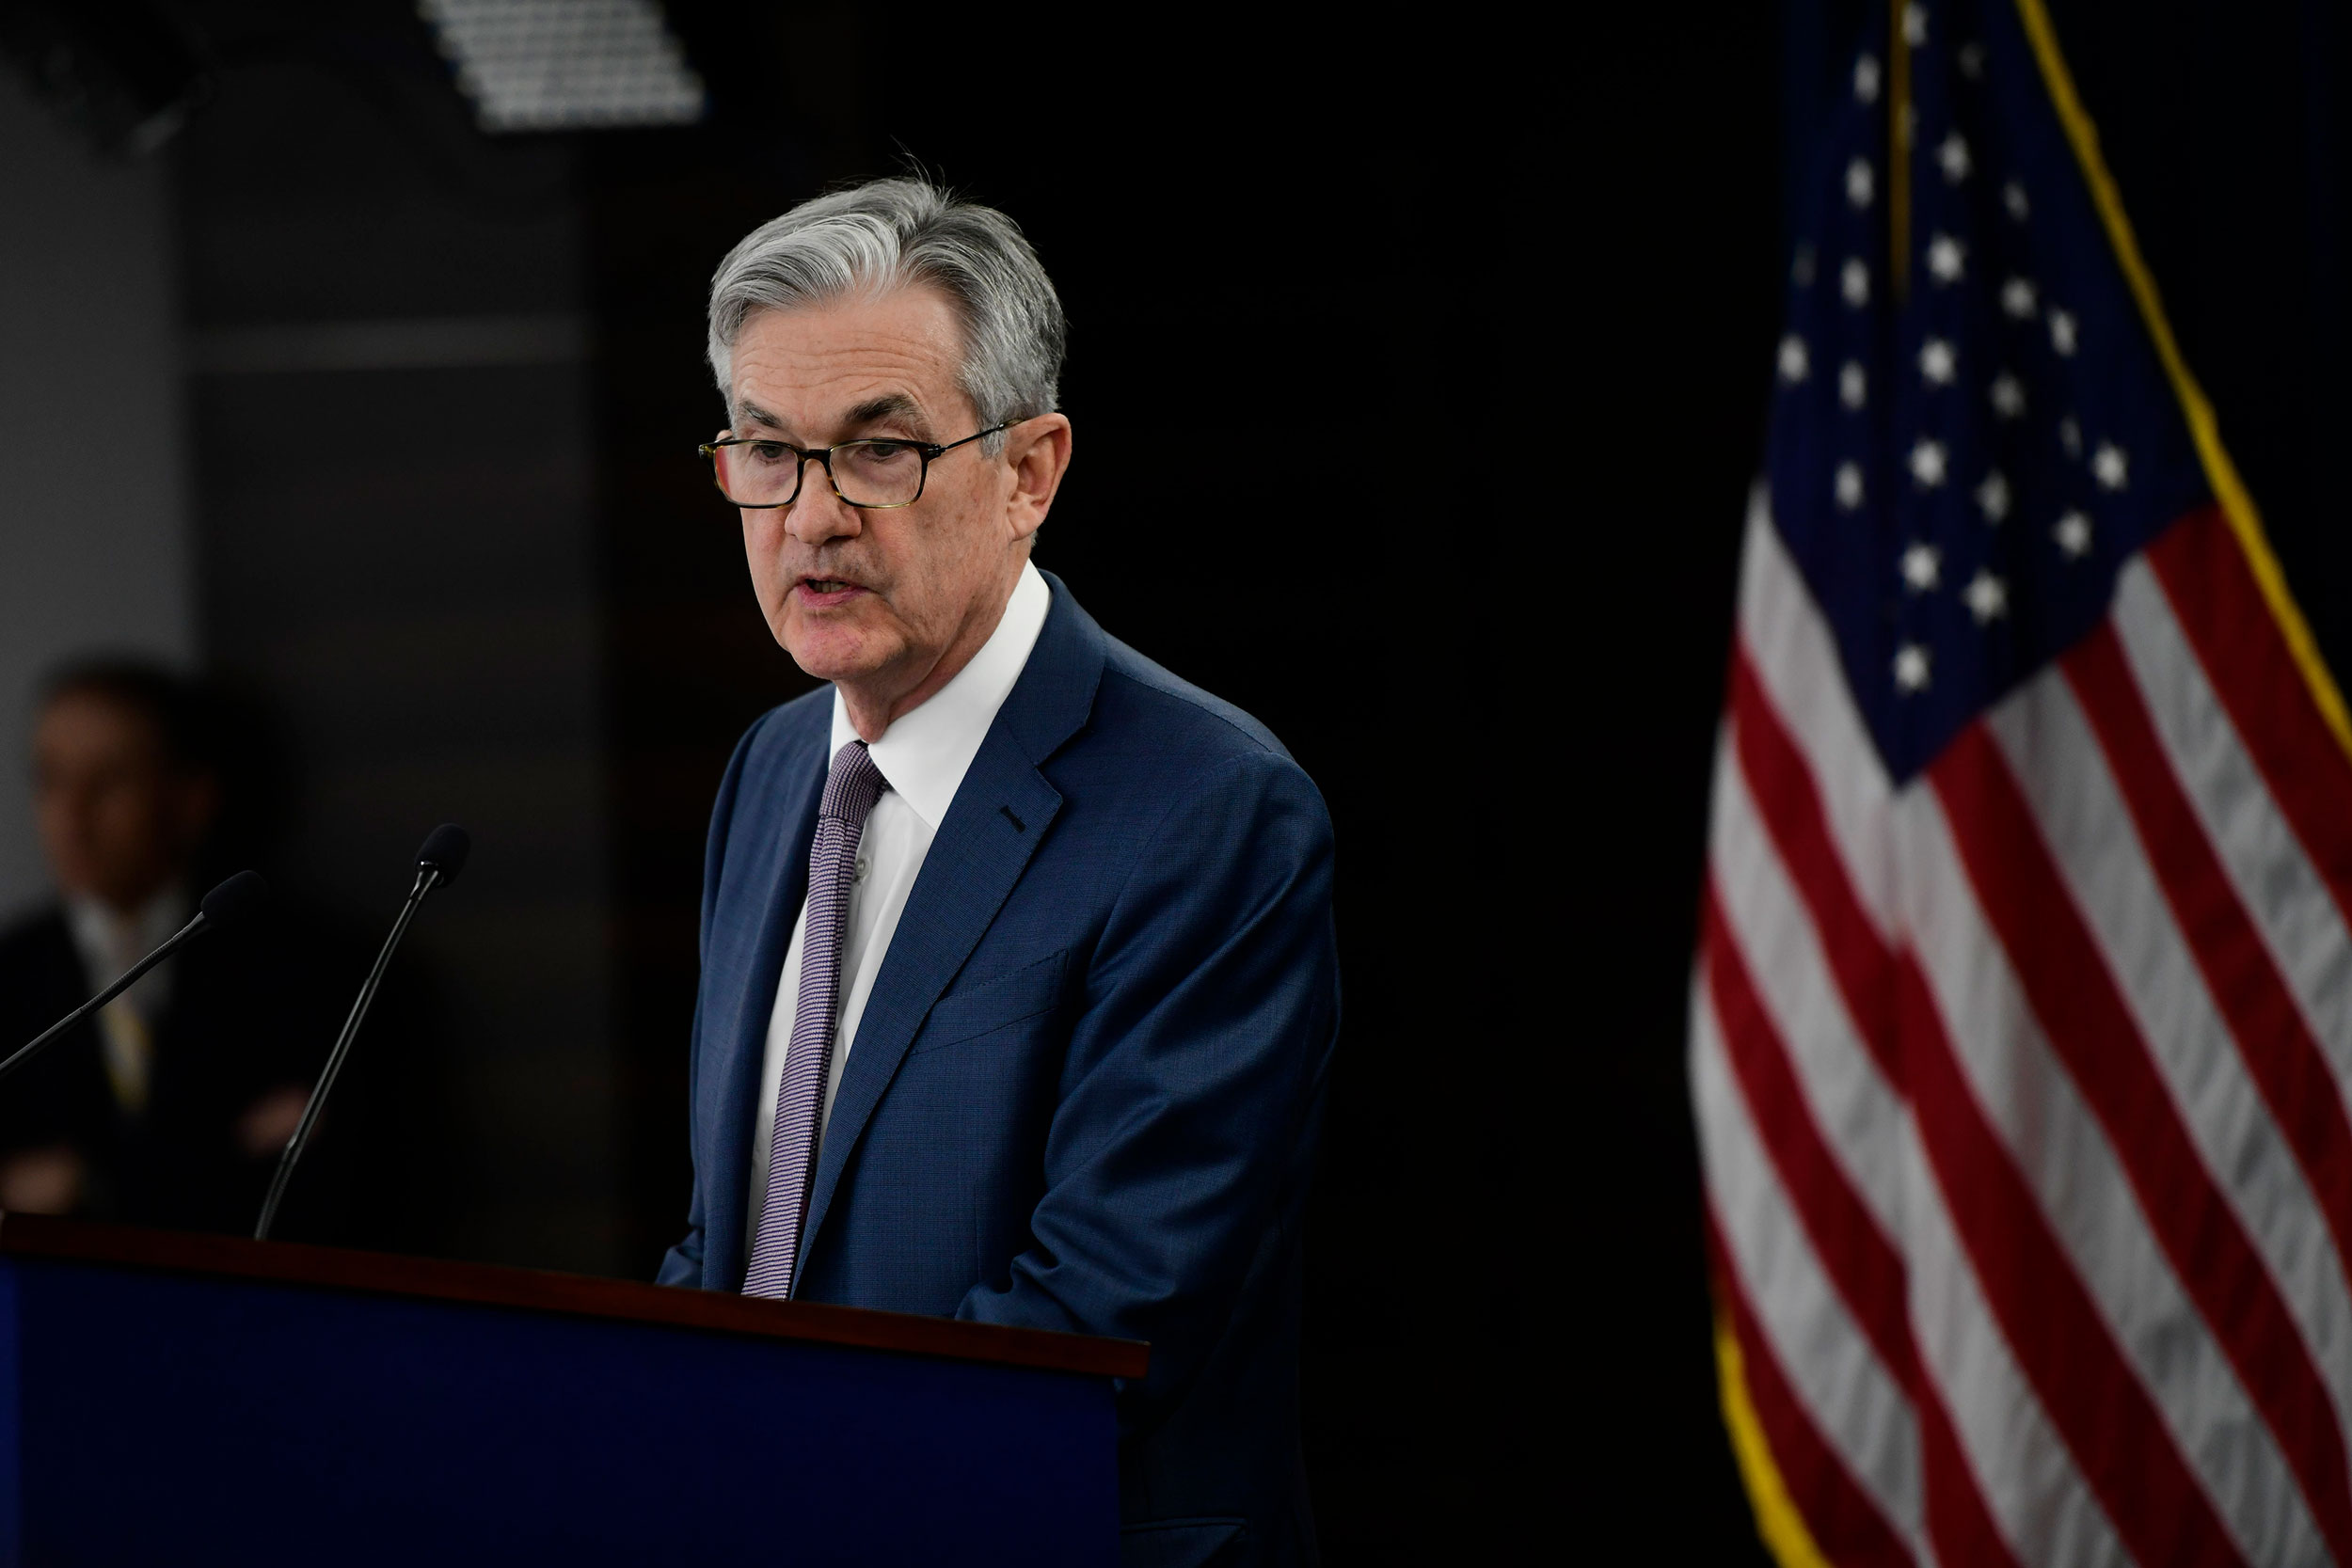 On March 3, Federal Reserve Chair Jerome Powell announced a half percentage point interest rate cut.